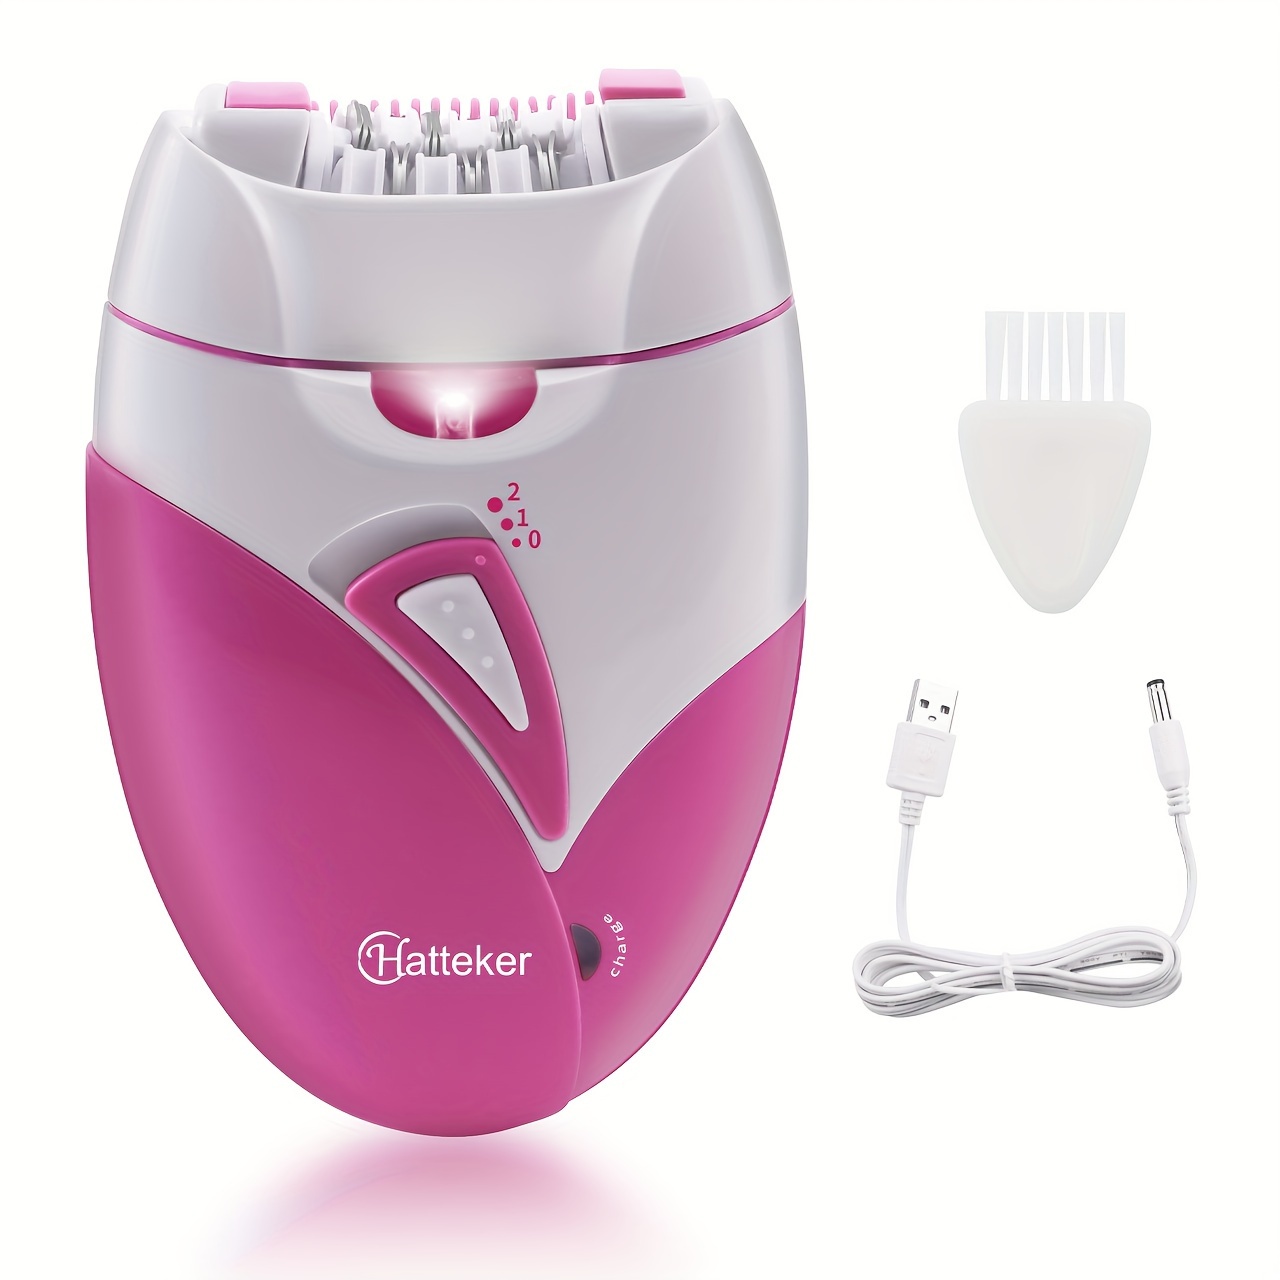 

Electric Female Epilator, Facial Full Body Hair Remover, Rechargeable Bikini Underarms Hair Removal Device, Summer Essentials For Women